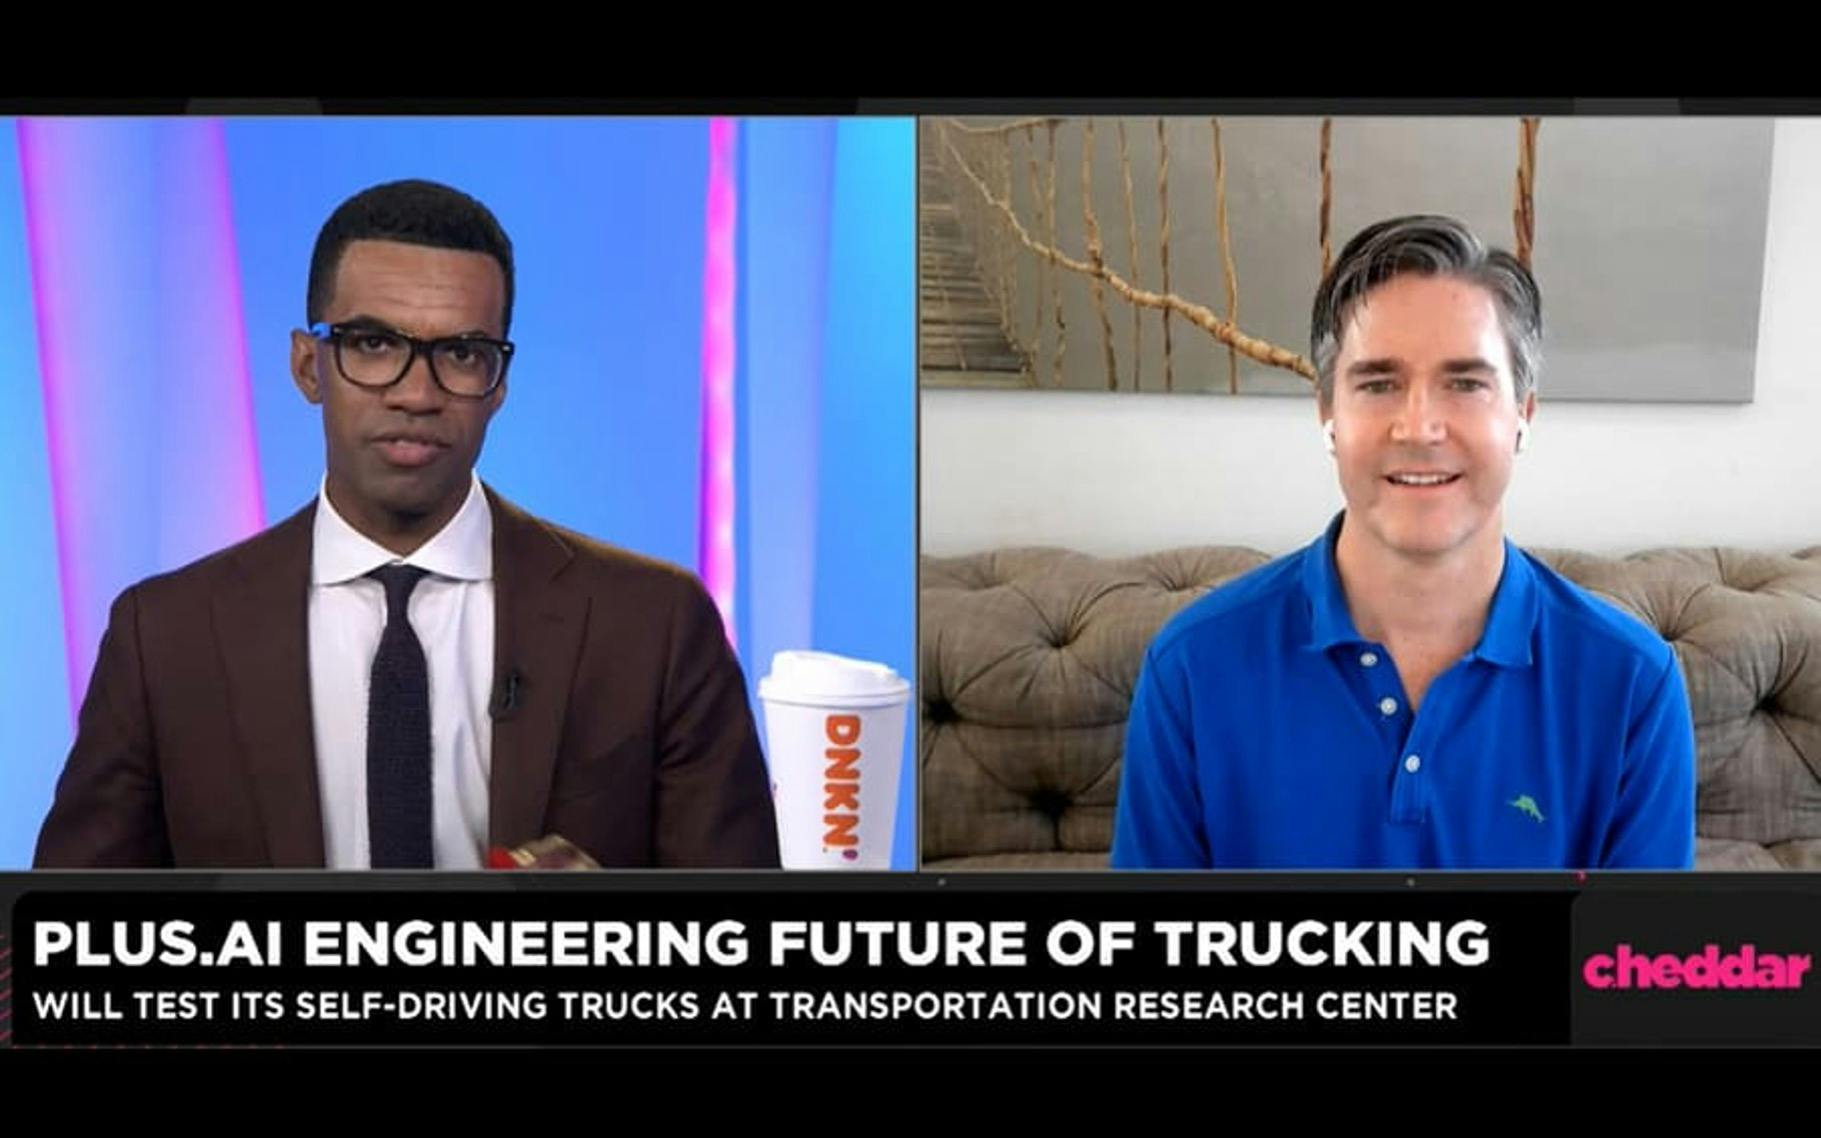 Cheddar TV interview: Plus.ai Engineering future of trucking